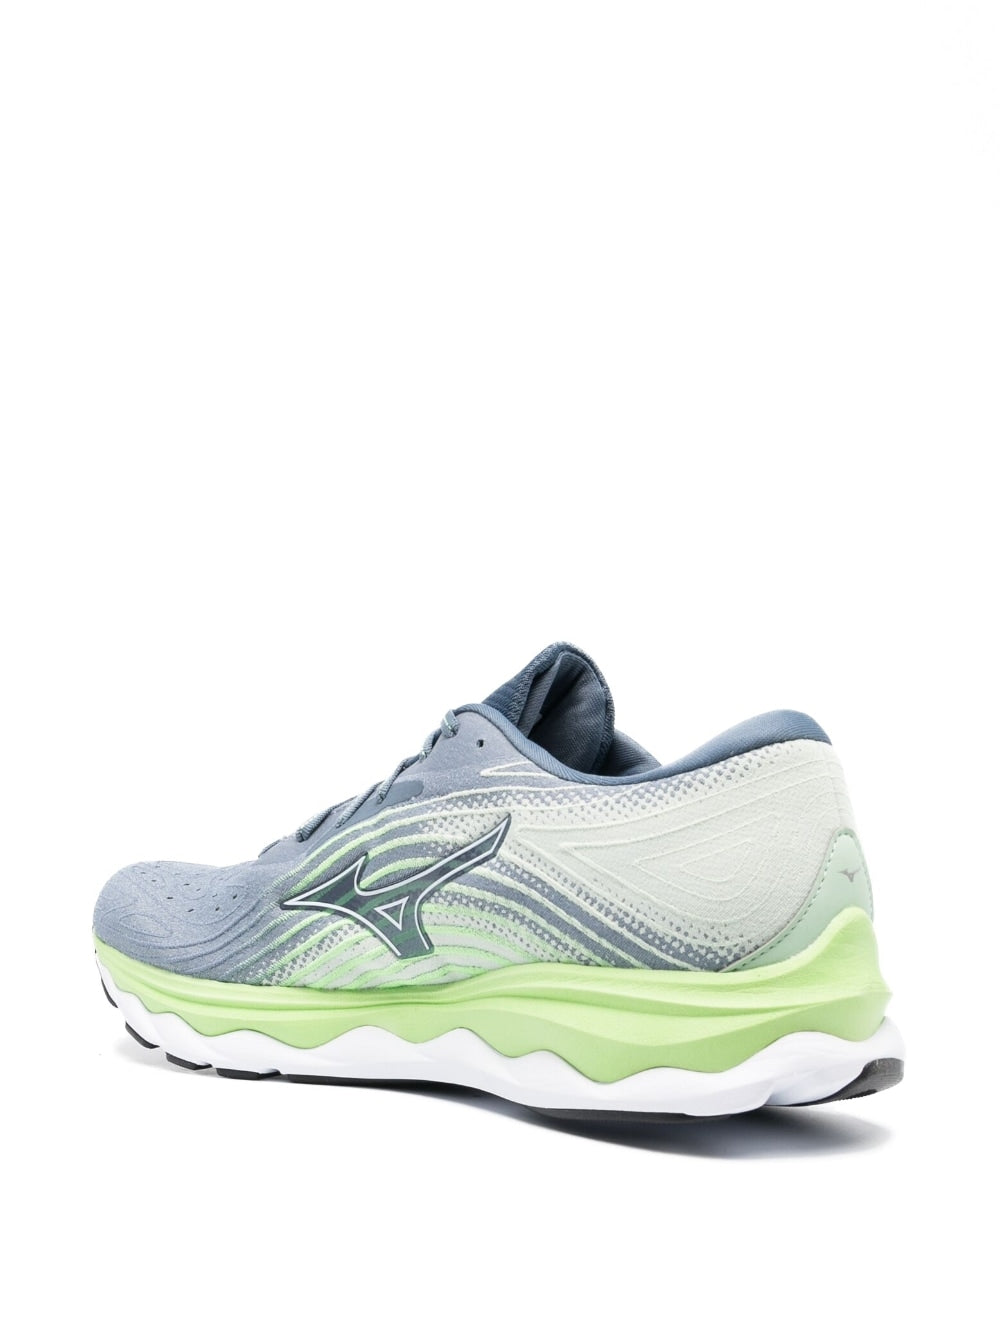 Grey/green Wave sky 6 running shoes